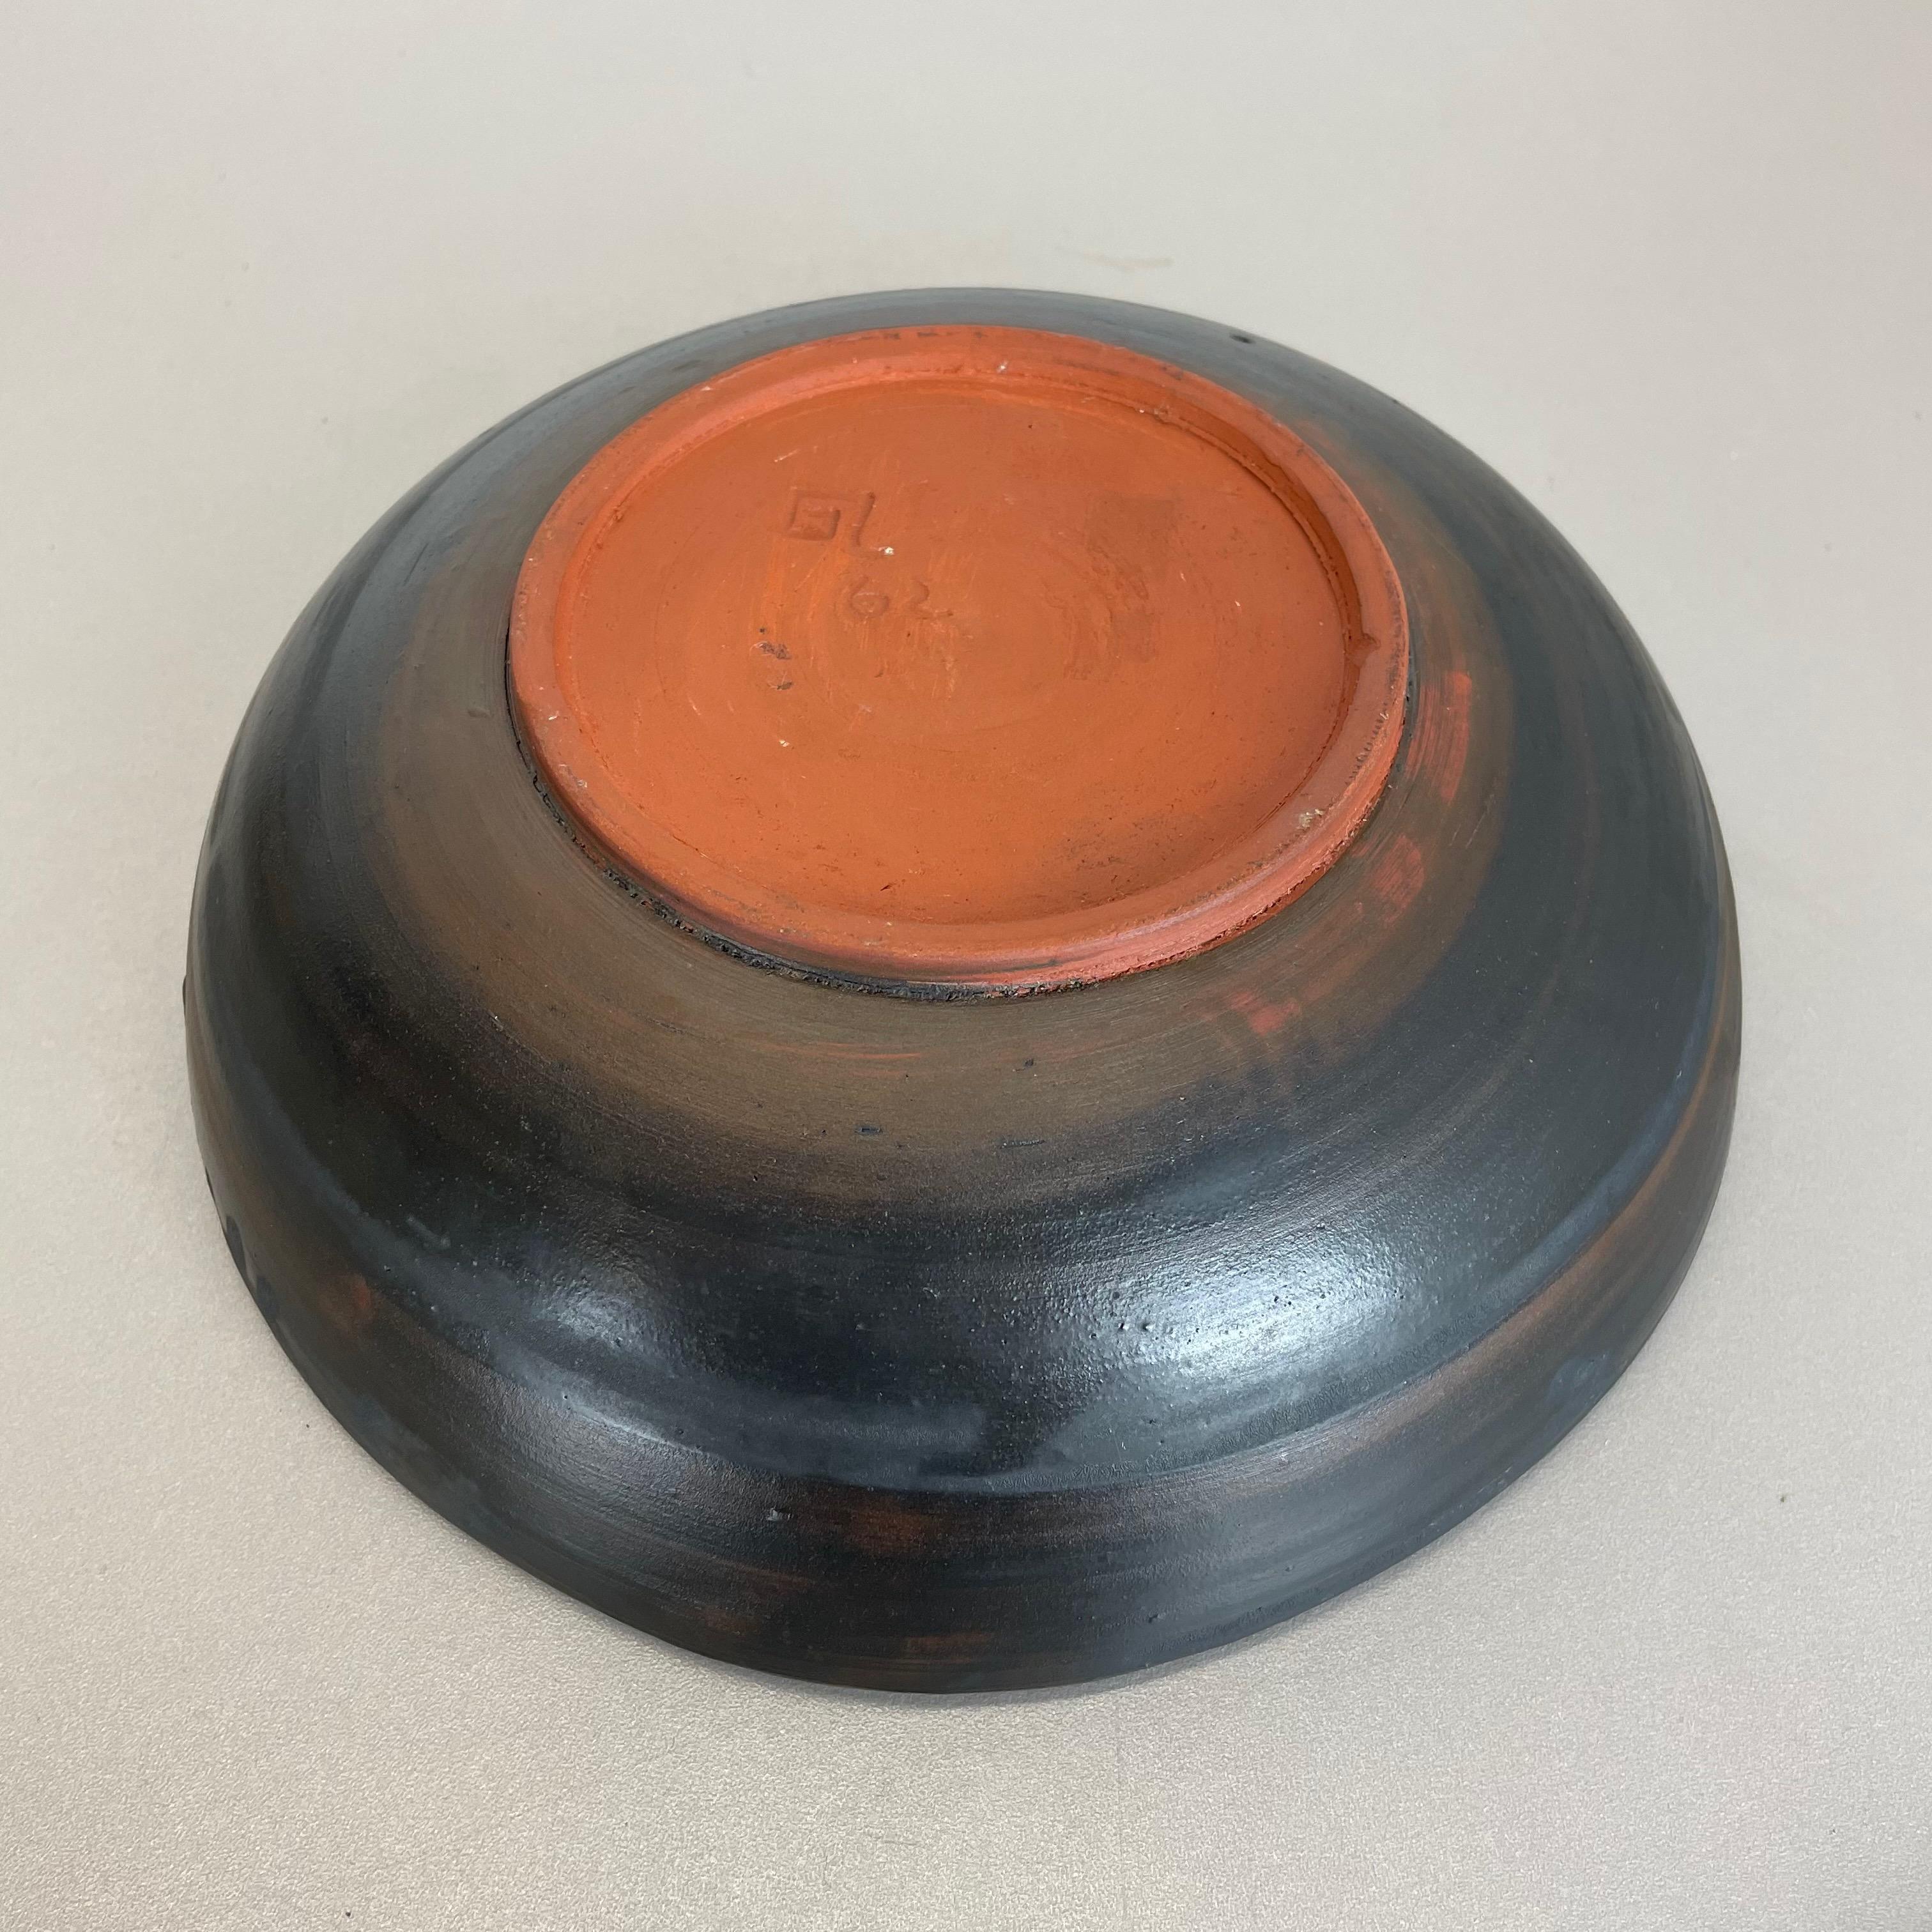 Ceramic Studio Pottery Bowl Shell Element by Gerhard Liebenthron, Germany, 1962 For Sale 9